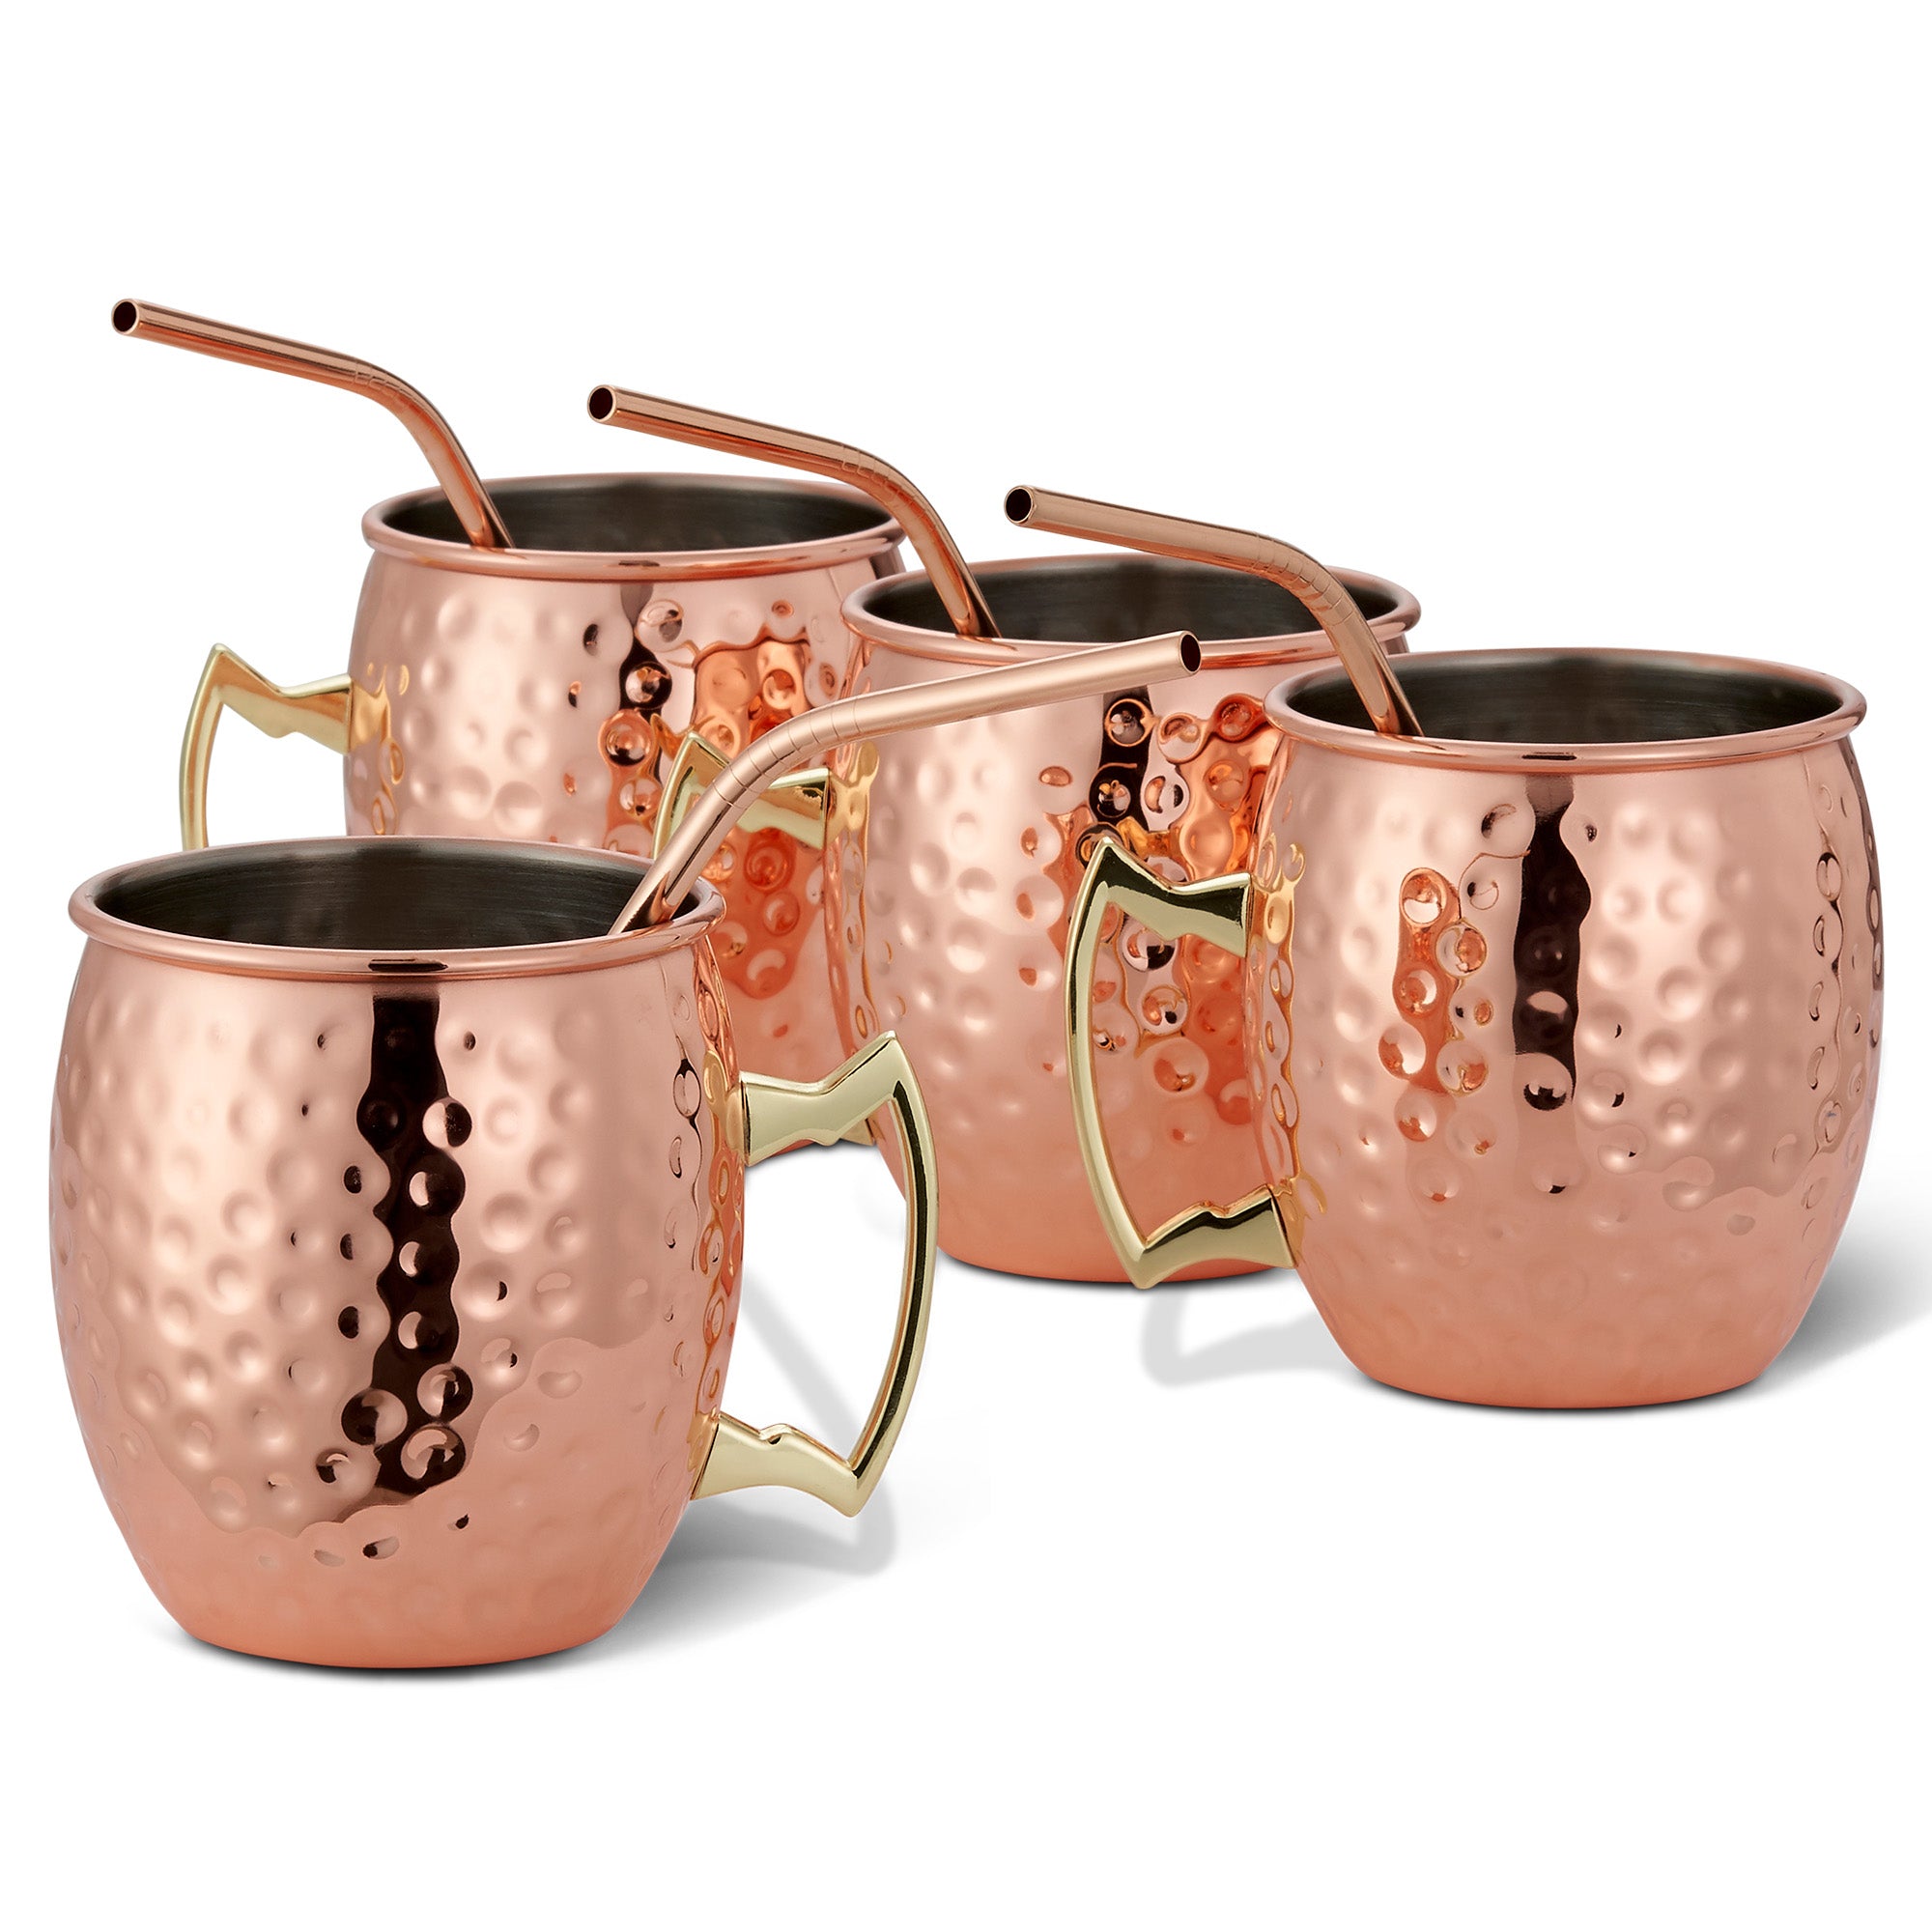 Vintage Stainless Steel 550ml Homestia Moscow Mule Copper Mug Deluxe Handle  1/2/4/6 Pcs Set Vodka Liquor Cup Beer Tumbler Cups